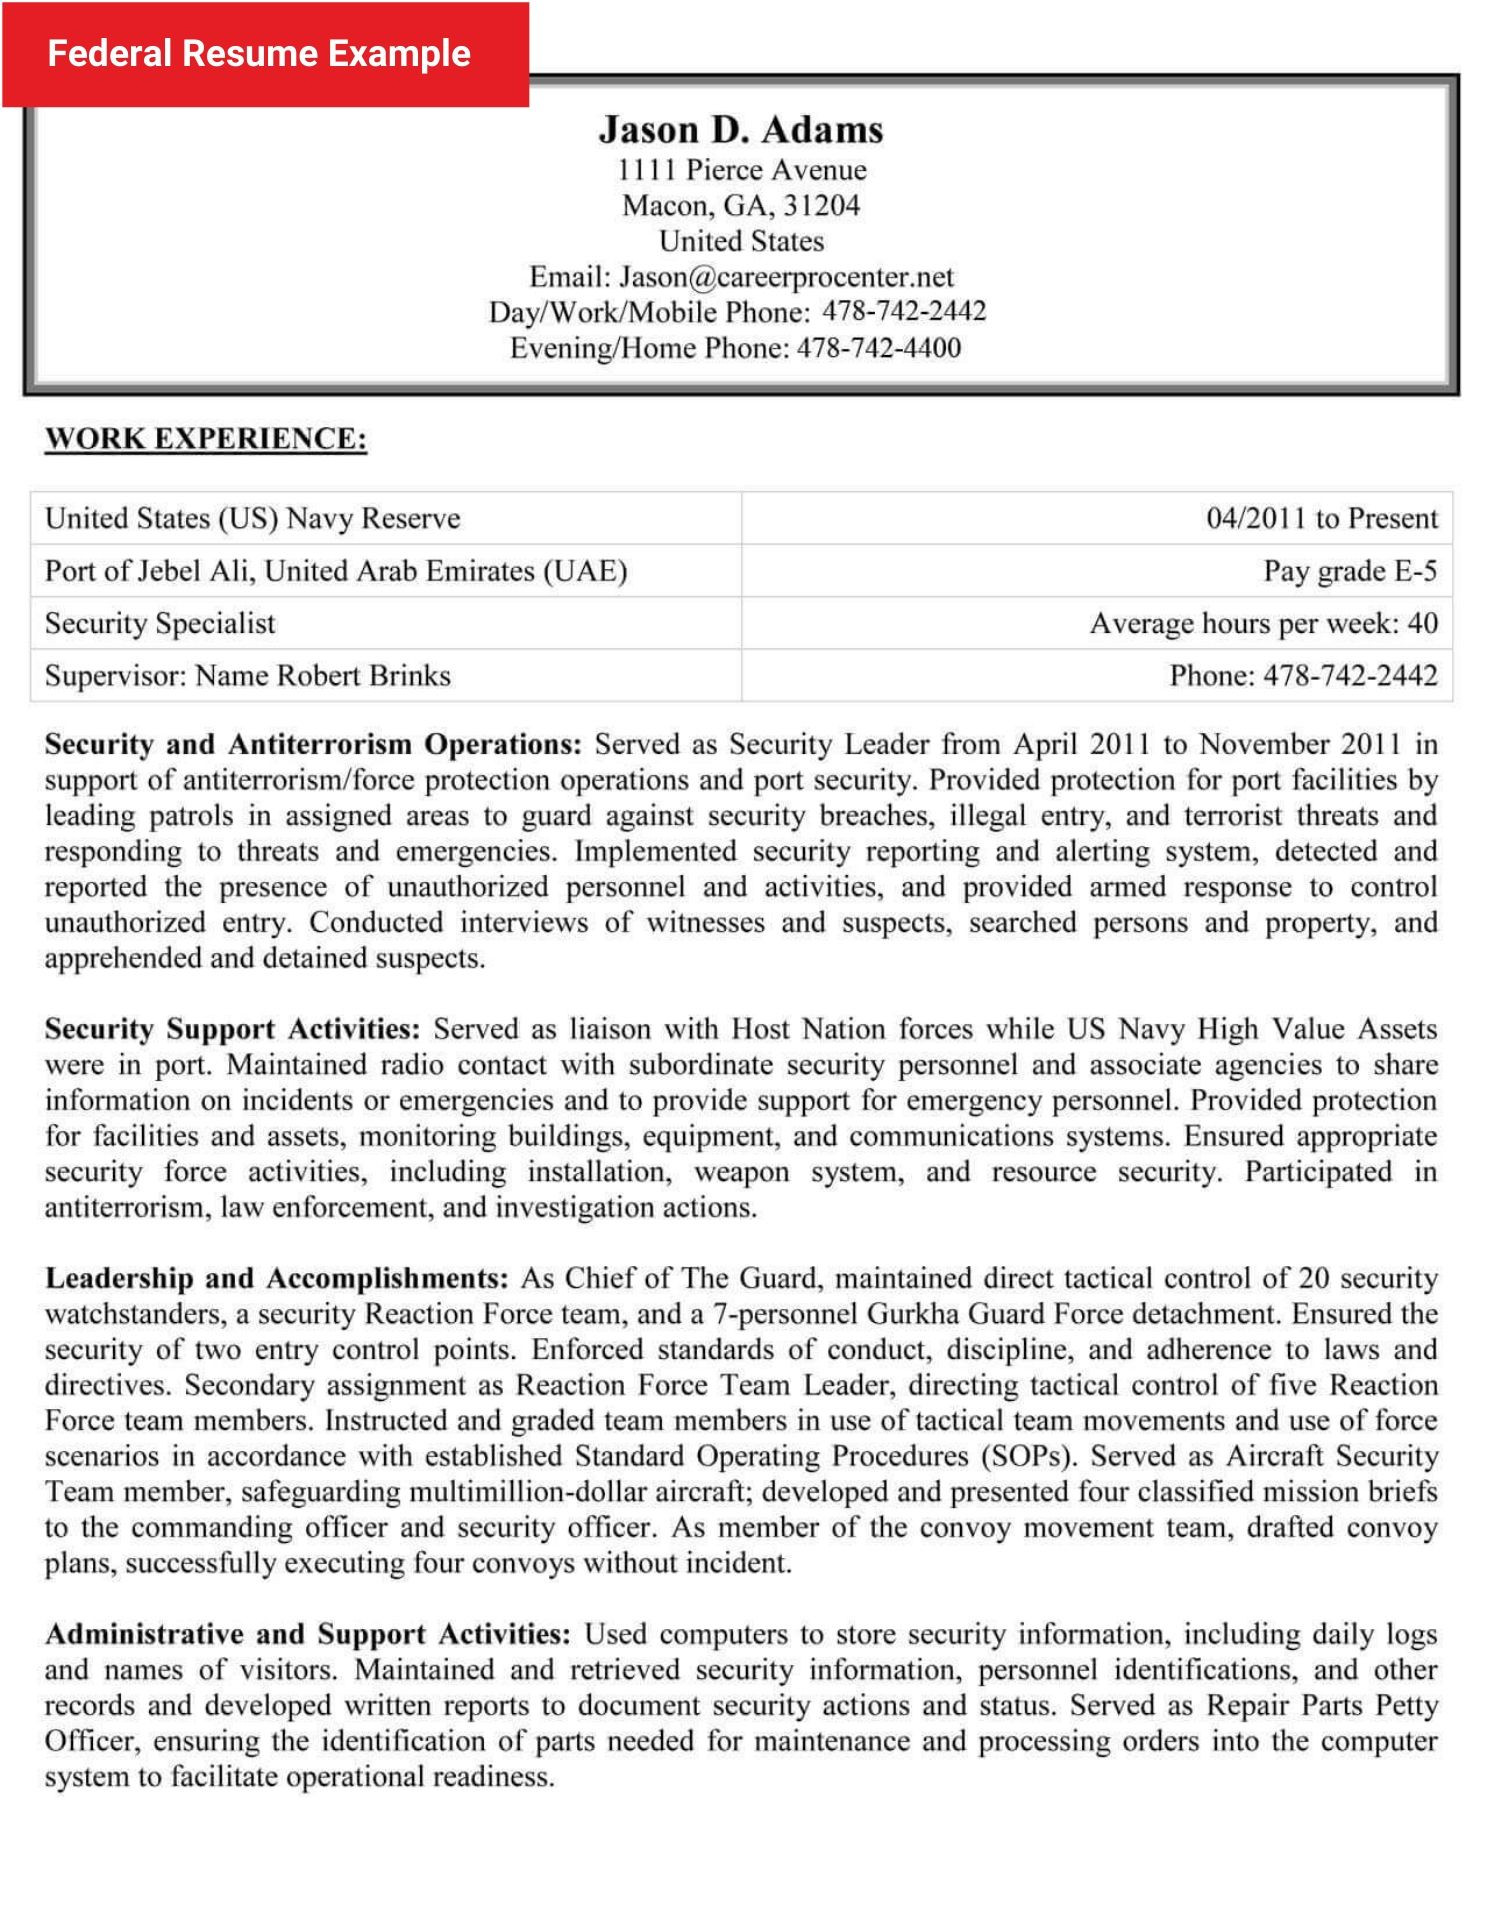 Federal Resume Samples with Examples Of Work 7 Free Federal Resume Samples & Writing Tips and Trends